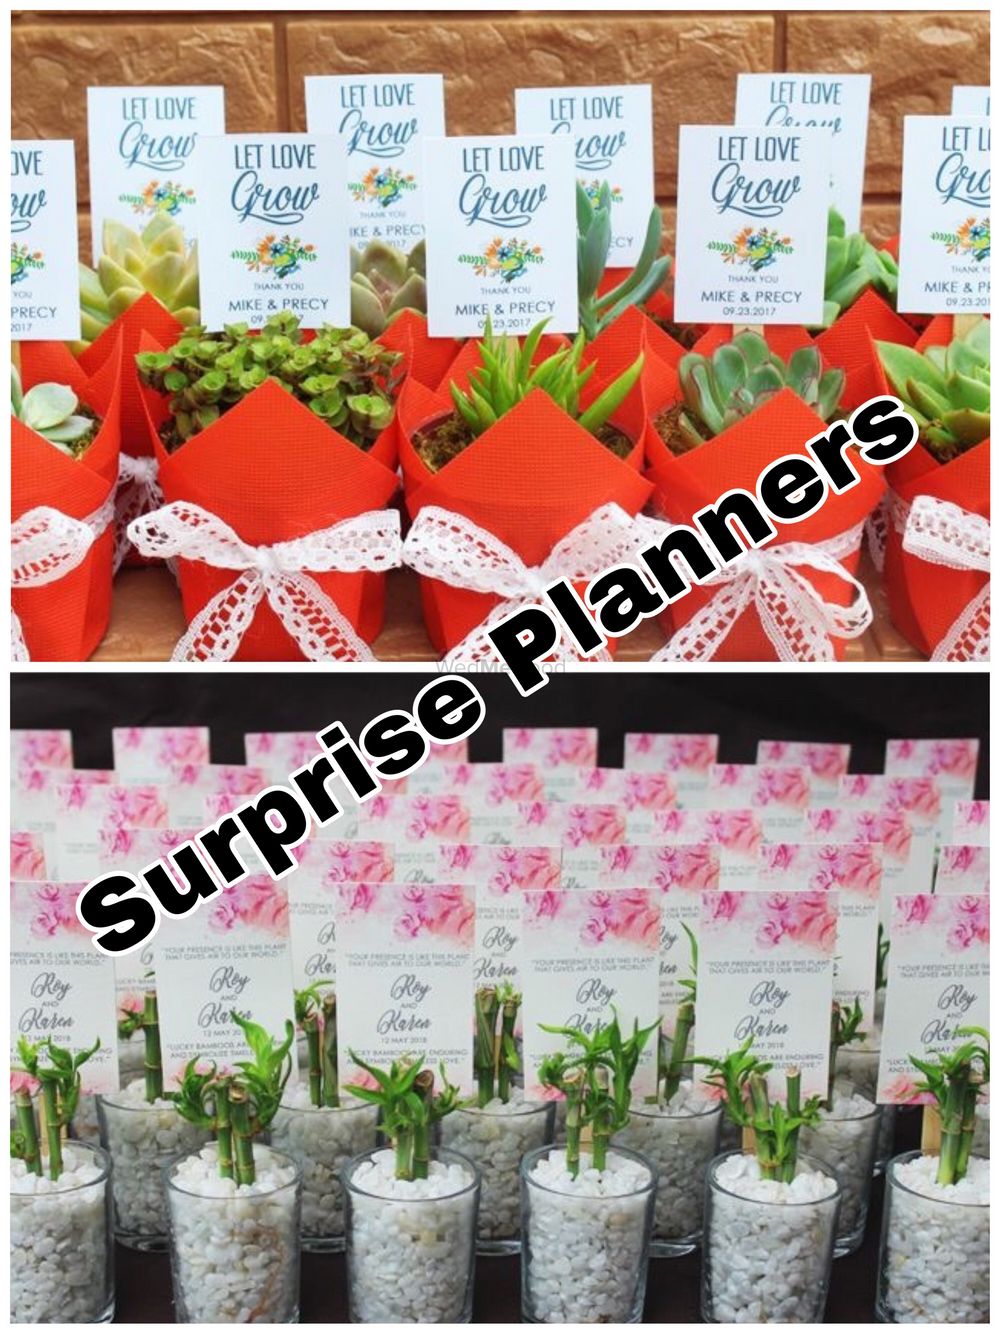 Photo From Planters - By Surprise Planners